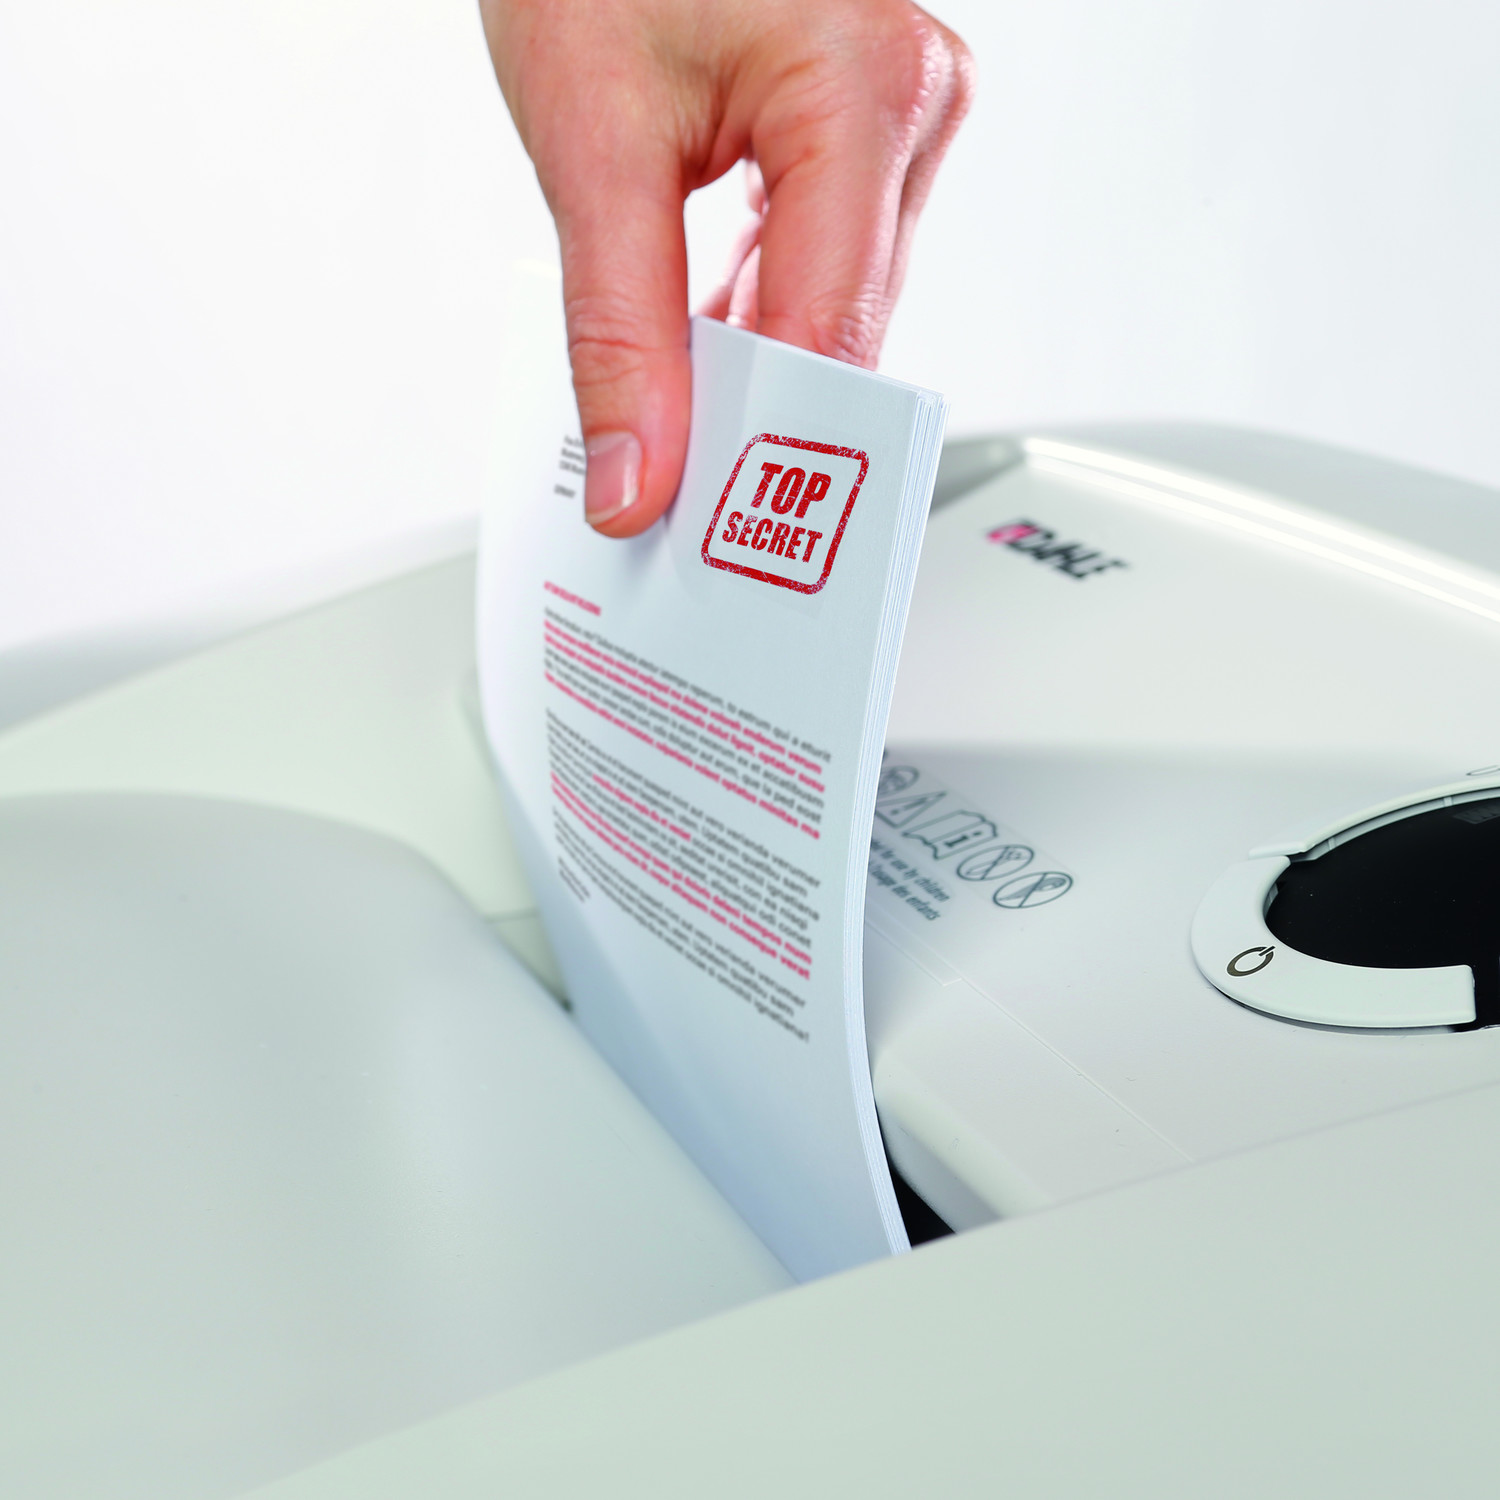 Innovative MHP technology® shreds up to 30 % more paper